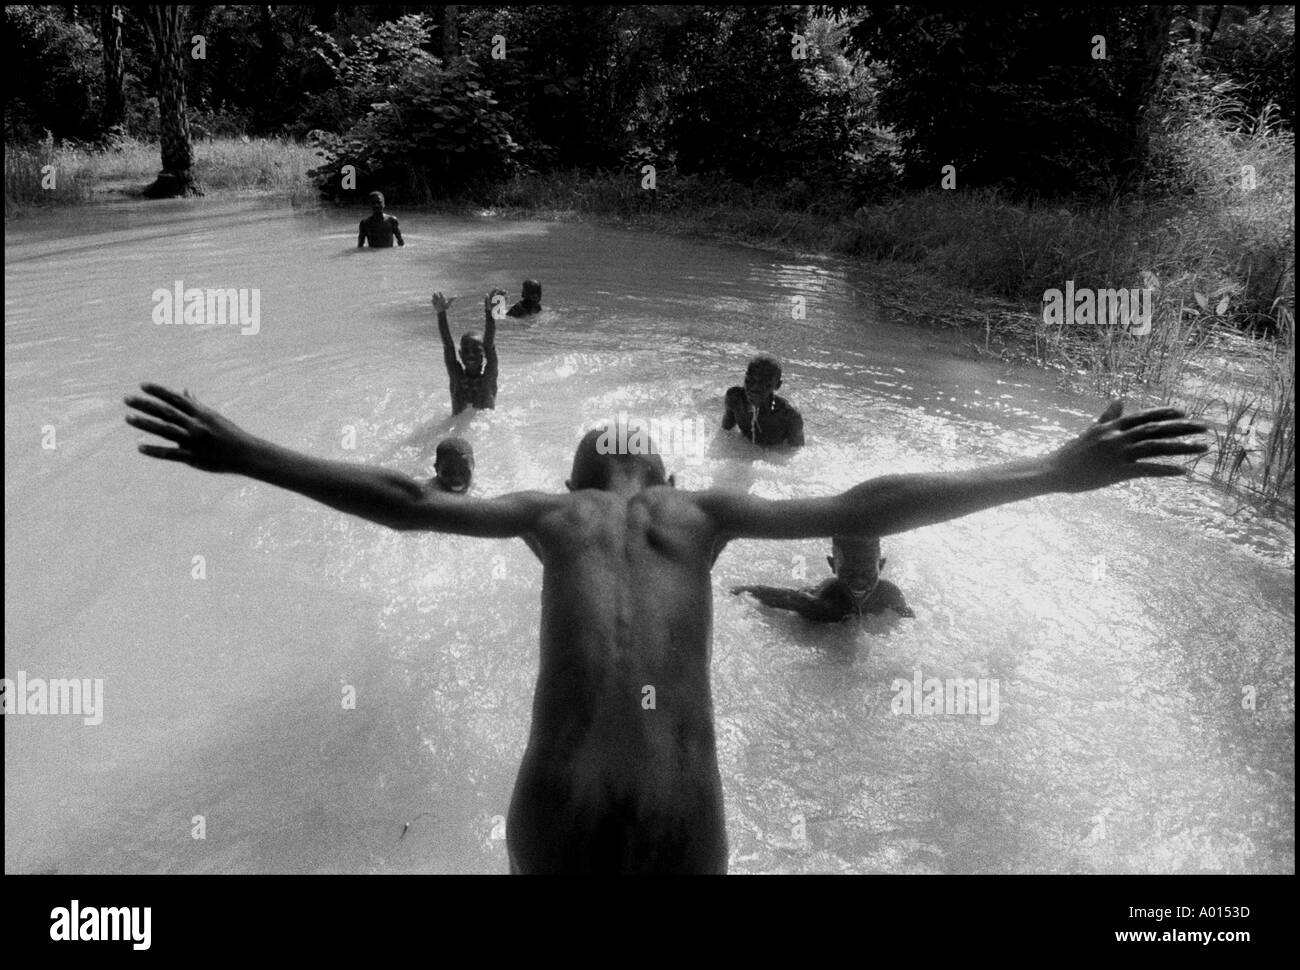 Briama Balde dives into the toufee with his friends in a small Muslim village in Guinea Bissau Photo by Ami Vitale Stock Photo